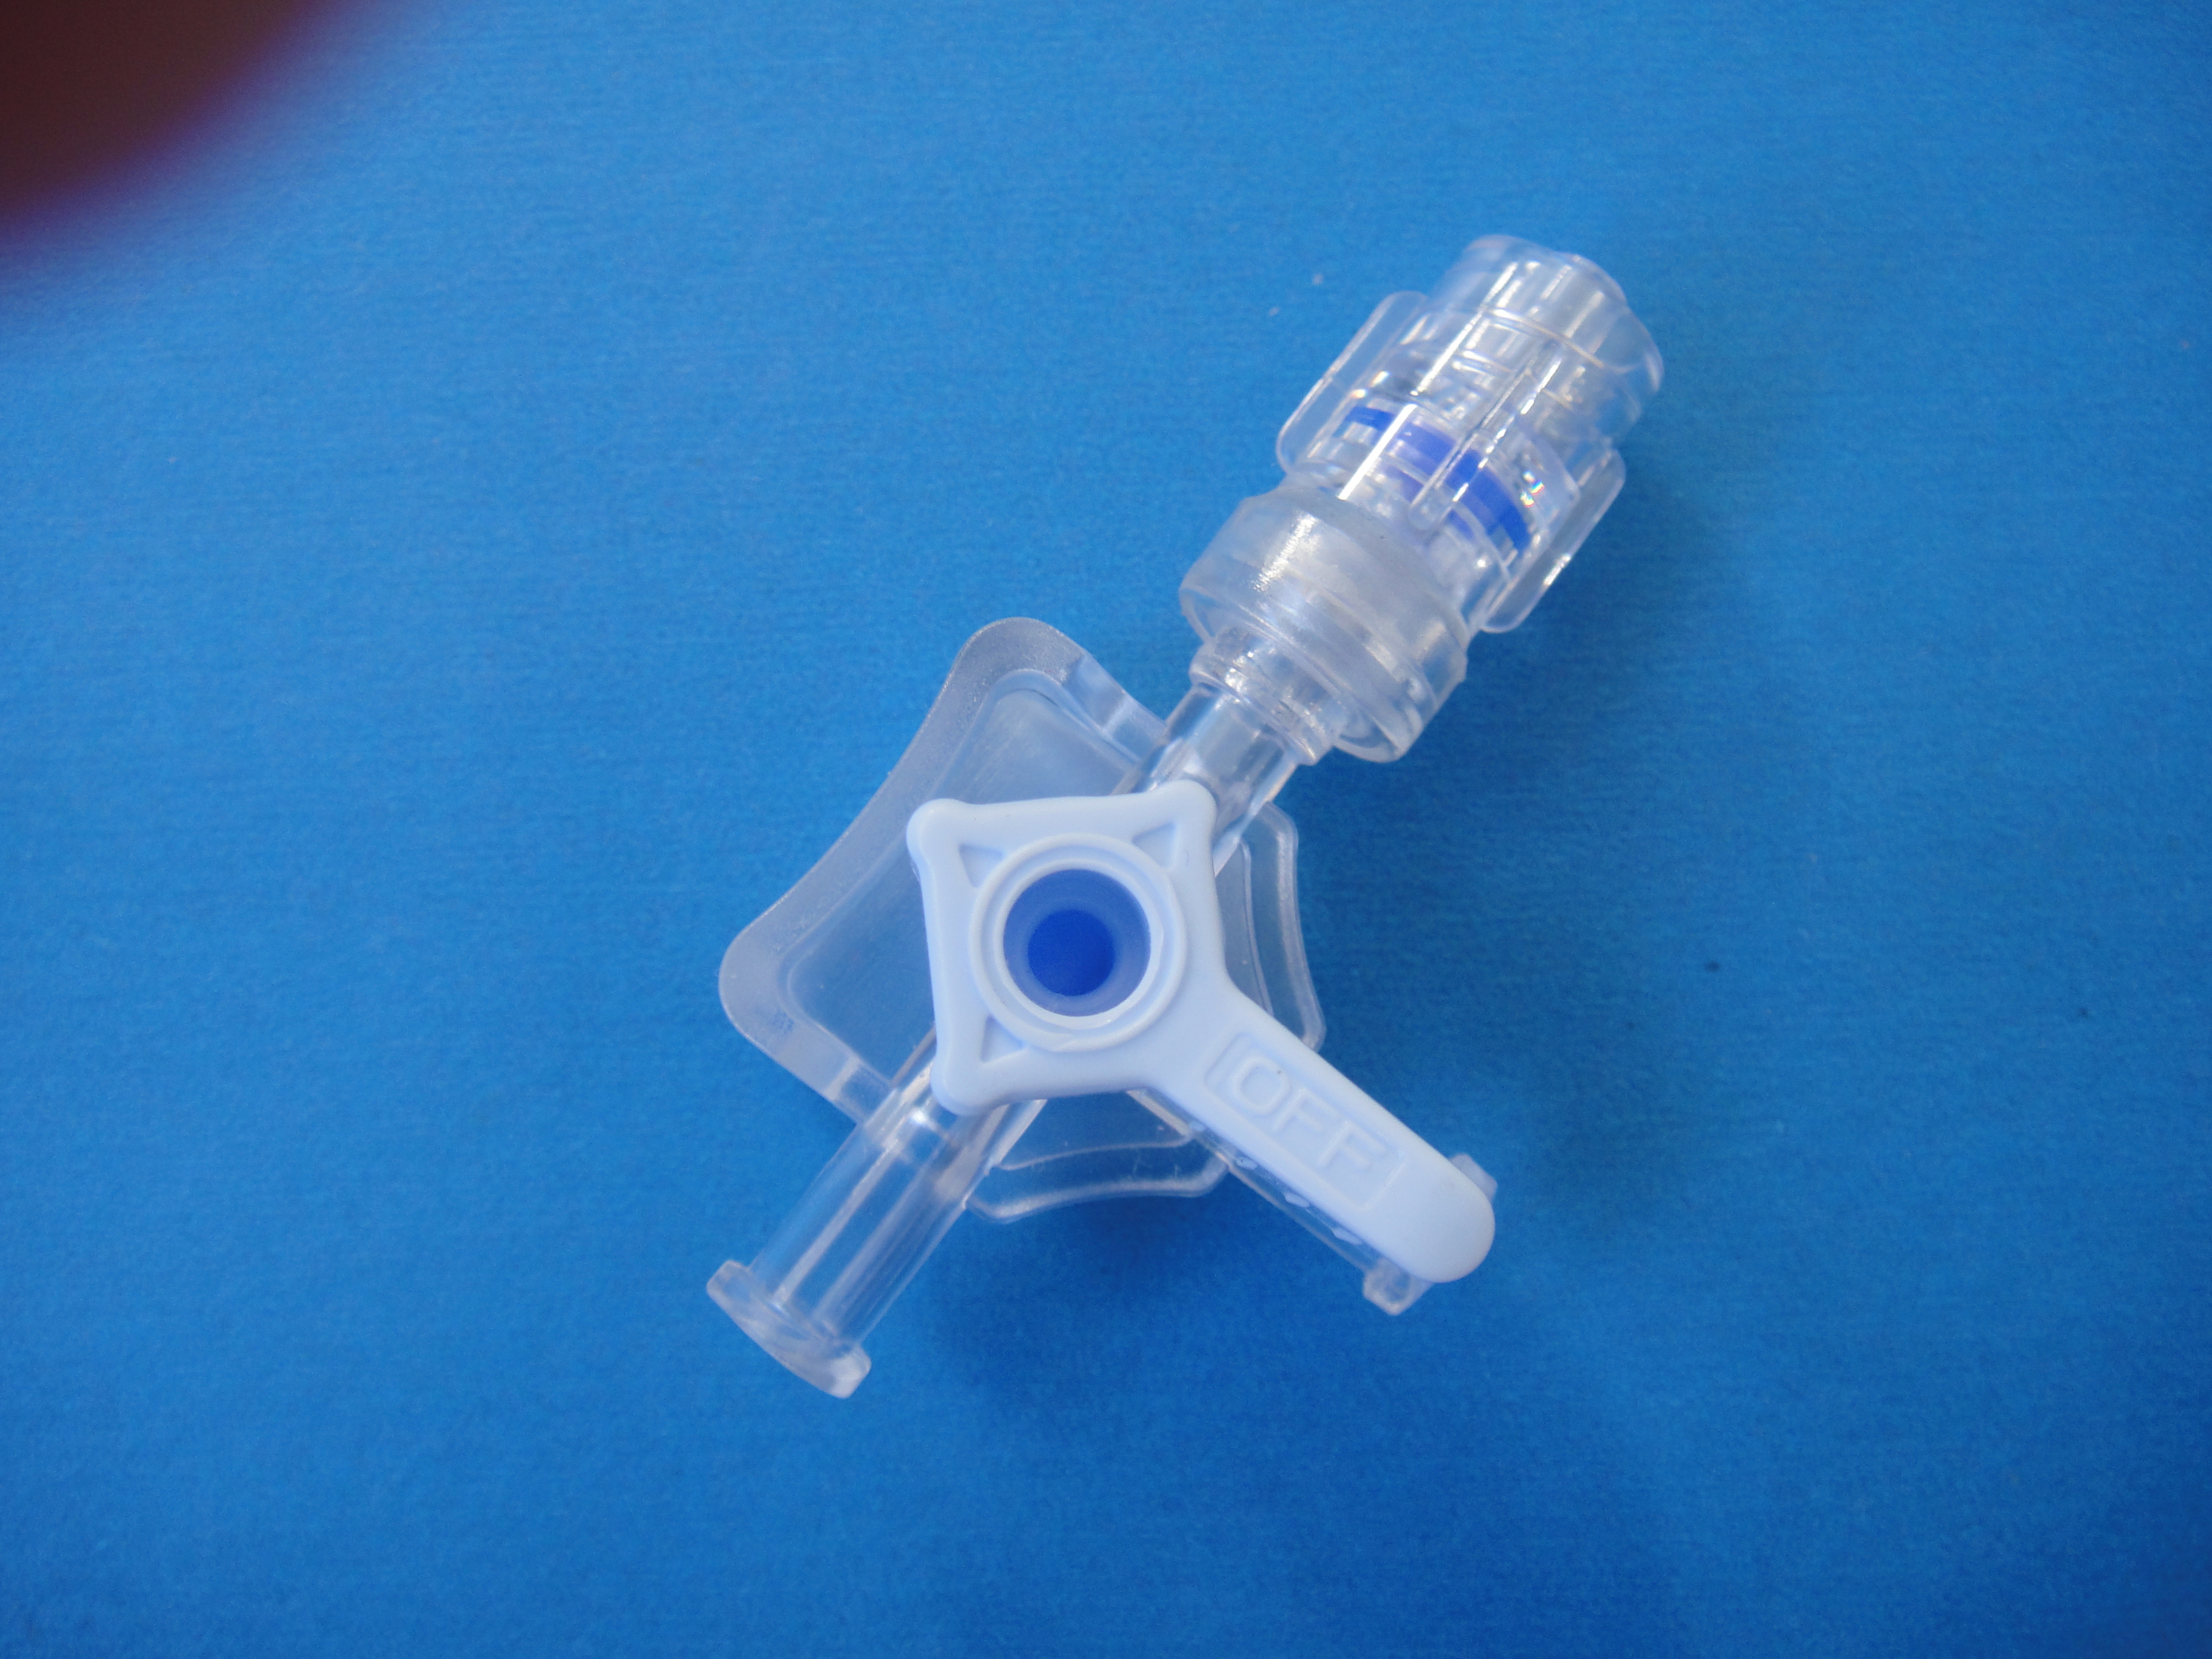 Manifold and stopcocks, 1200psi, Blue Handle, Off Handle, Rotating Male Luer, Female Luer